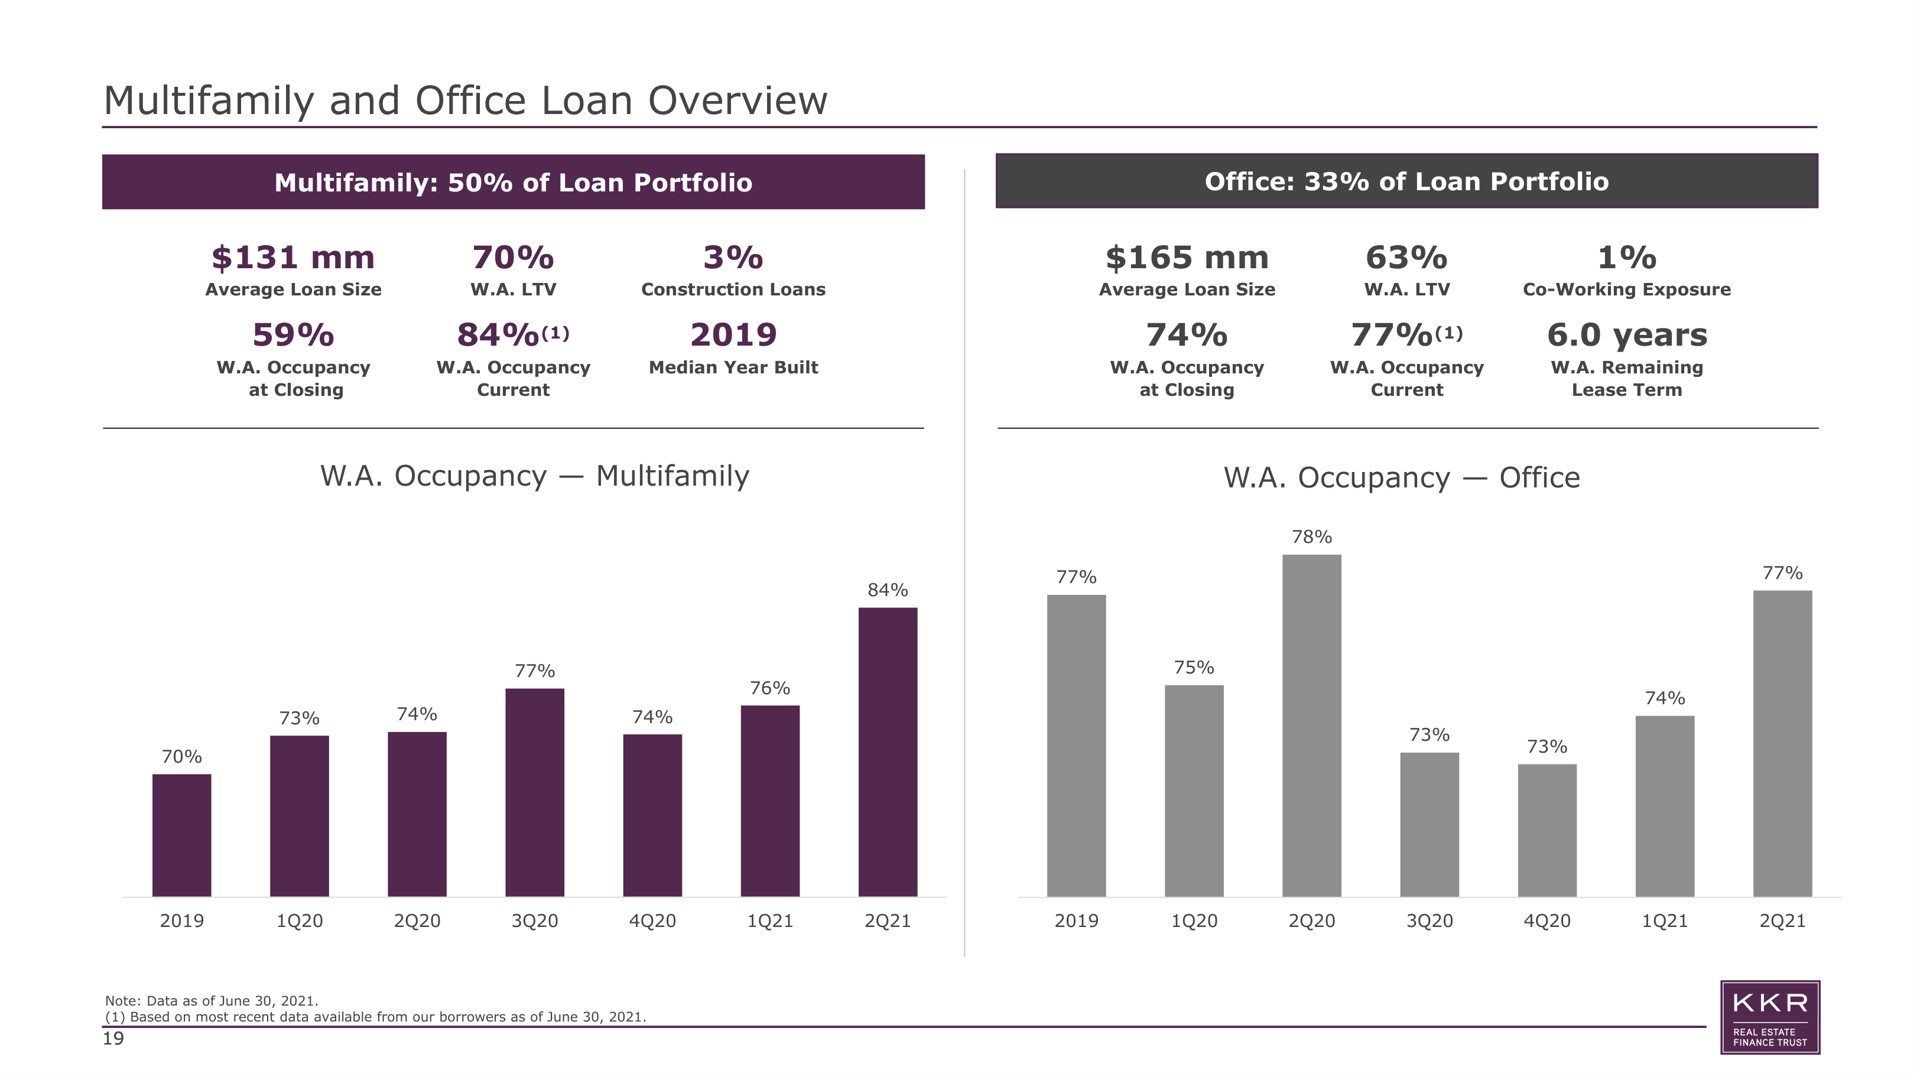 and office loan overview of loan portfolio office of loan portfolio years a occupancy a occupancy office | KKR Real Estate Finance Trust